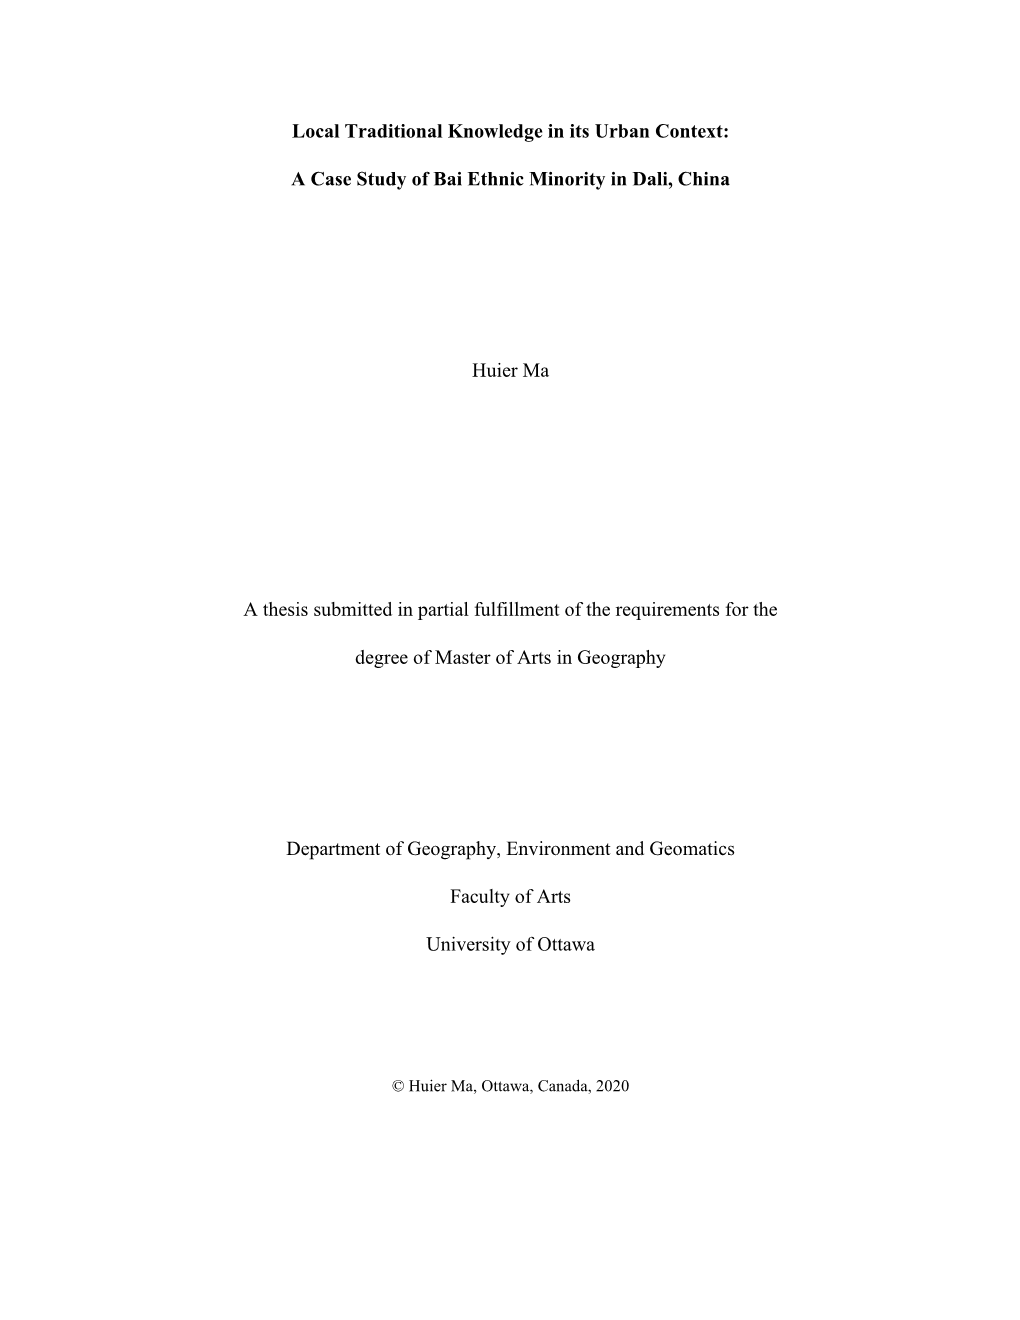 A Case Study of Bai Ethnic Minority in Dali, China Huier Ma a Thesis Submitte